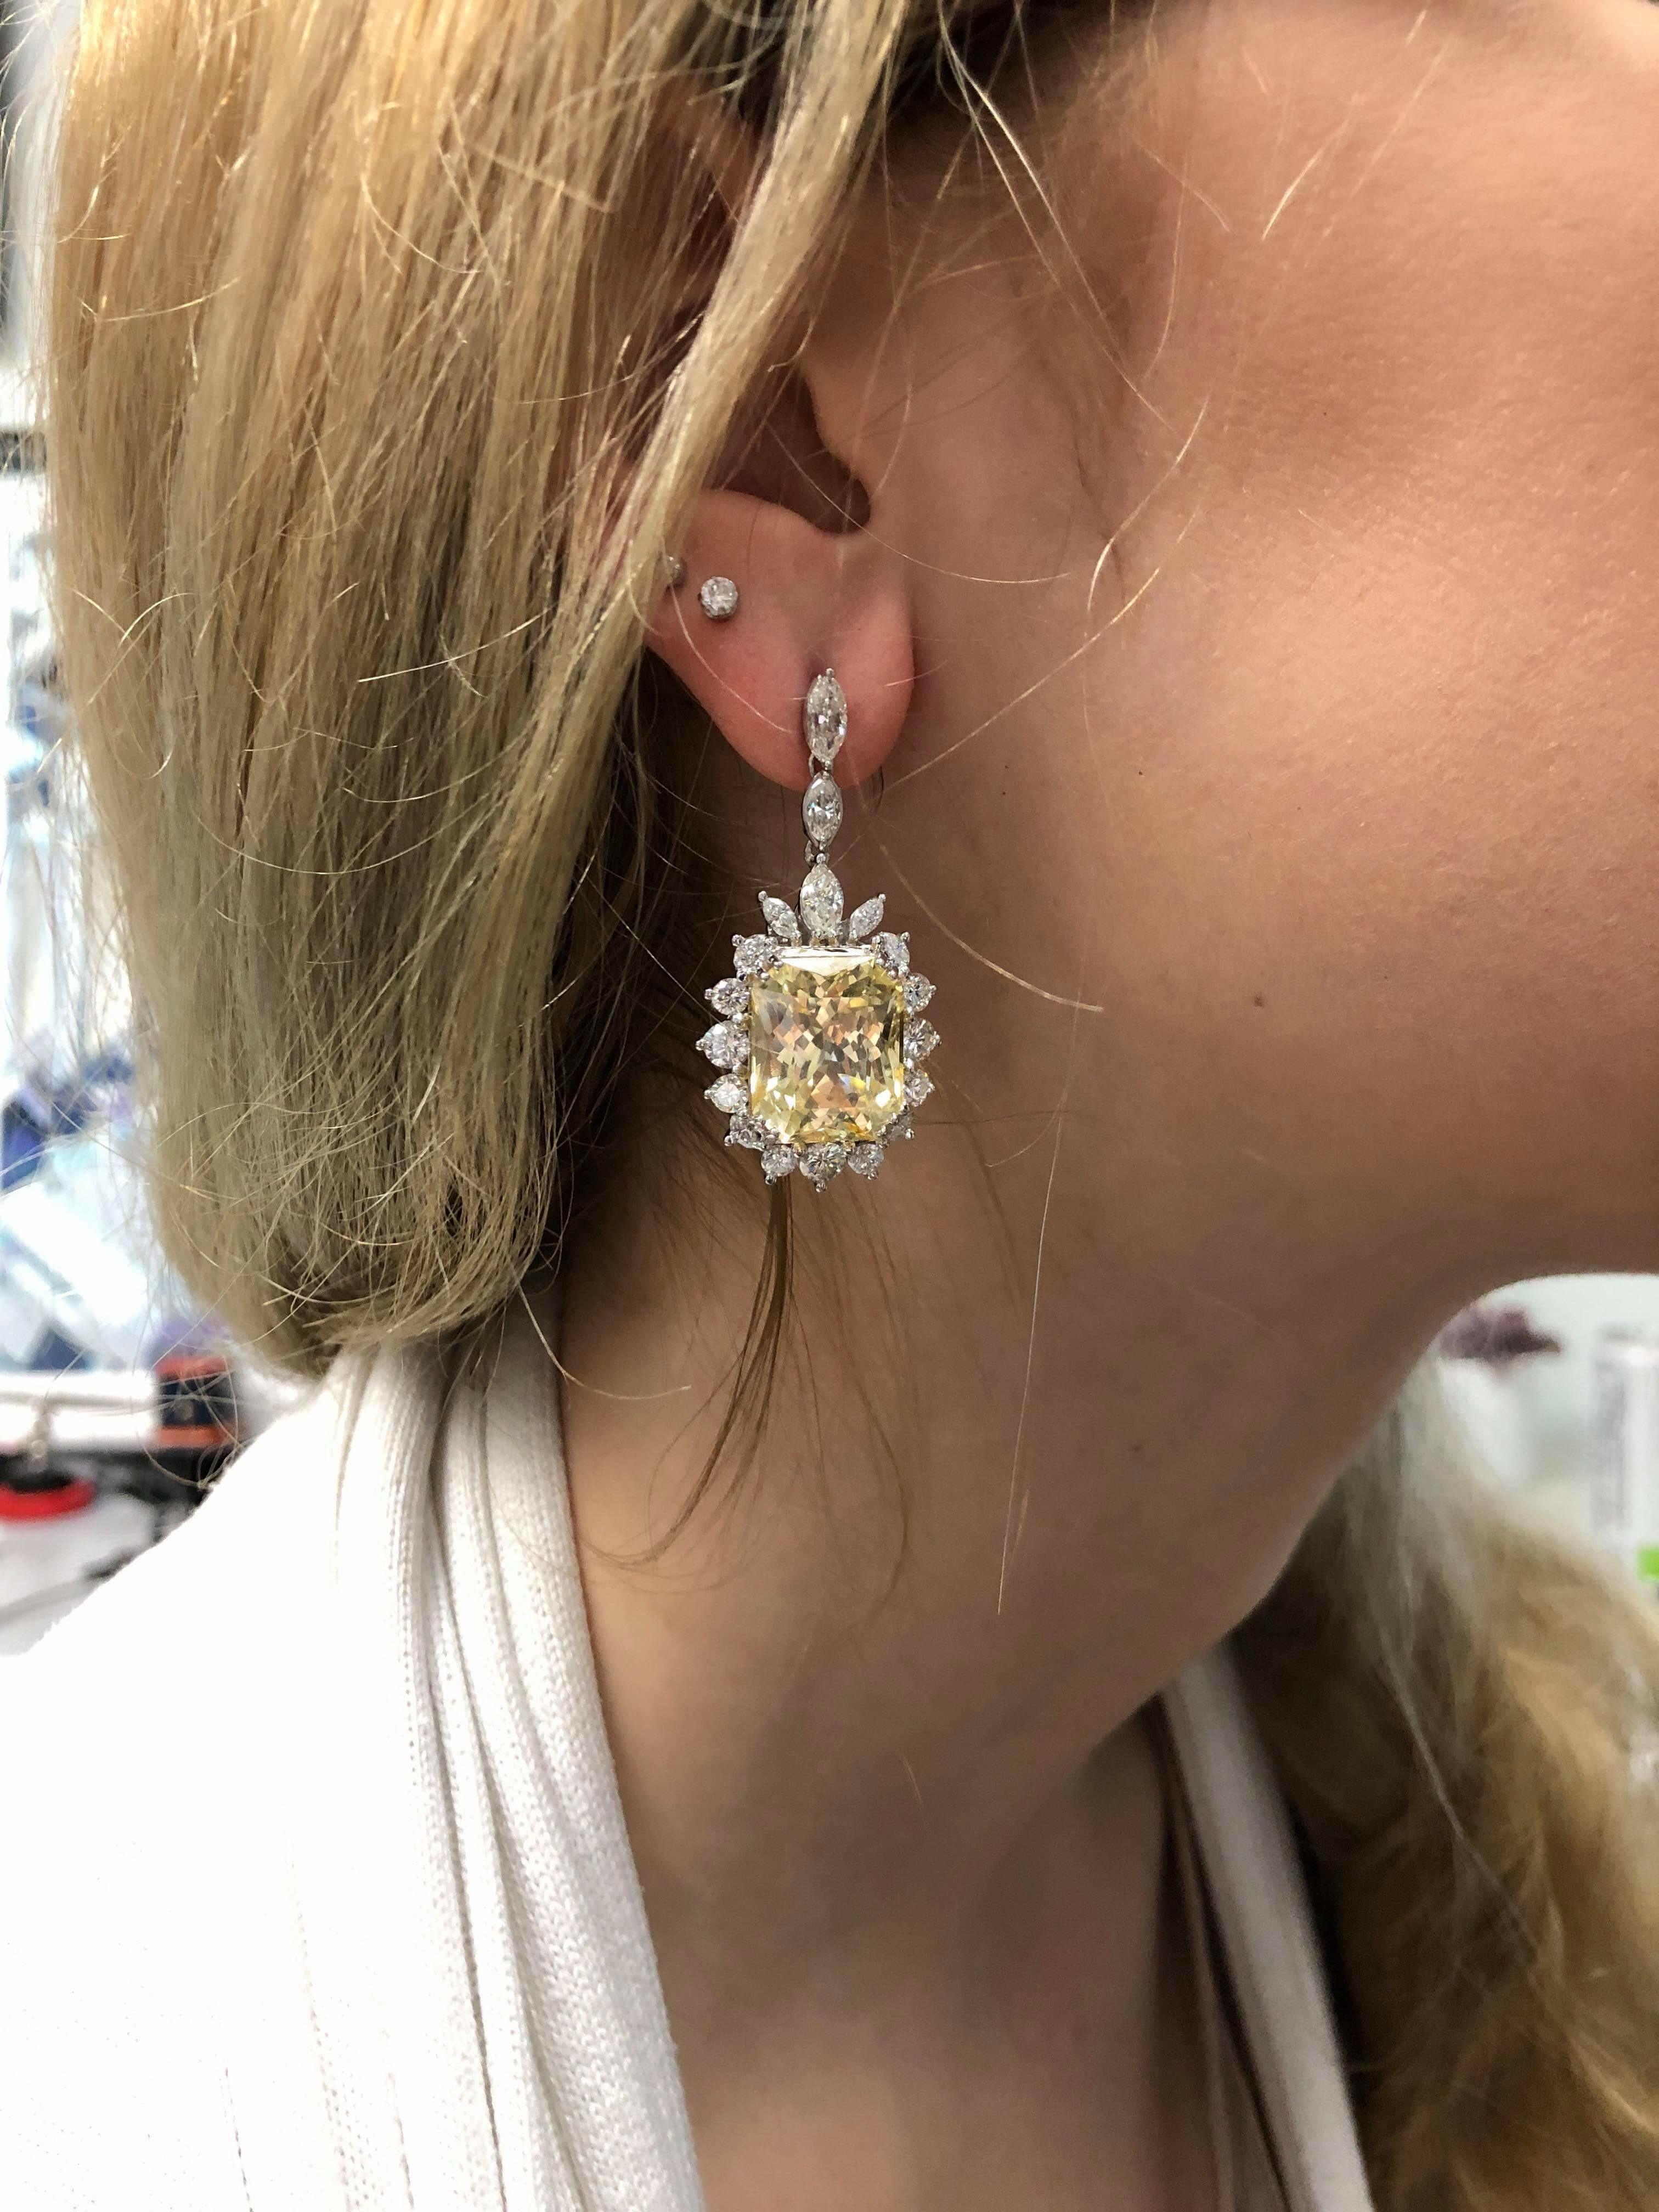 These jaw-dropping earrings are 38.71ctw in two octagonal cut, natural, yellow sapphires from Sri Lanka, not heat treatment. They are surrounded by 5.72ctw in round and marquise cut diamonds, all set in 14kt white gold earrings and platinum